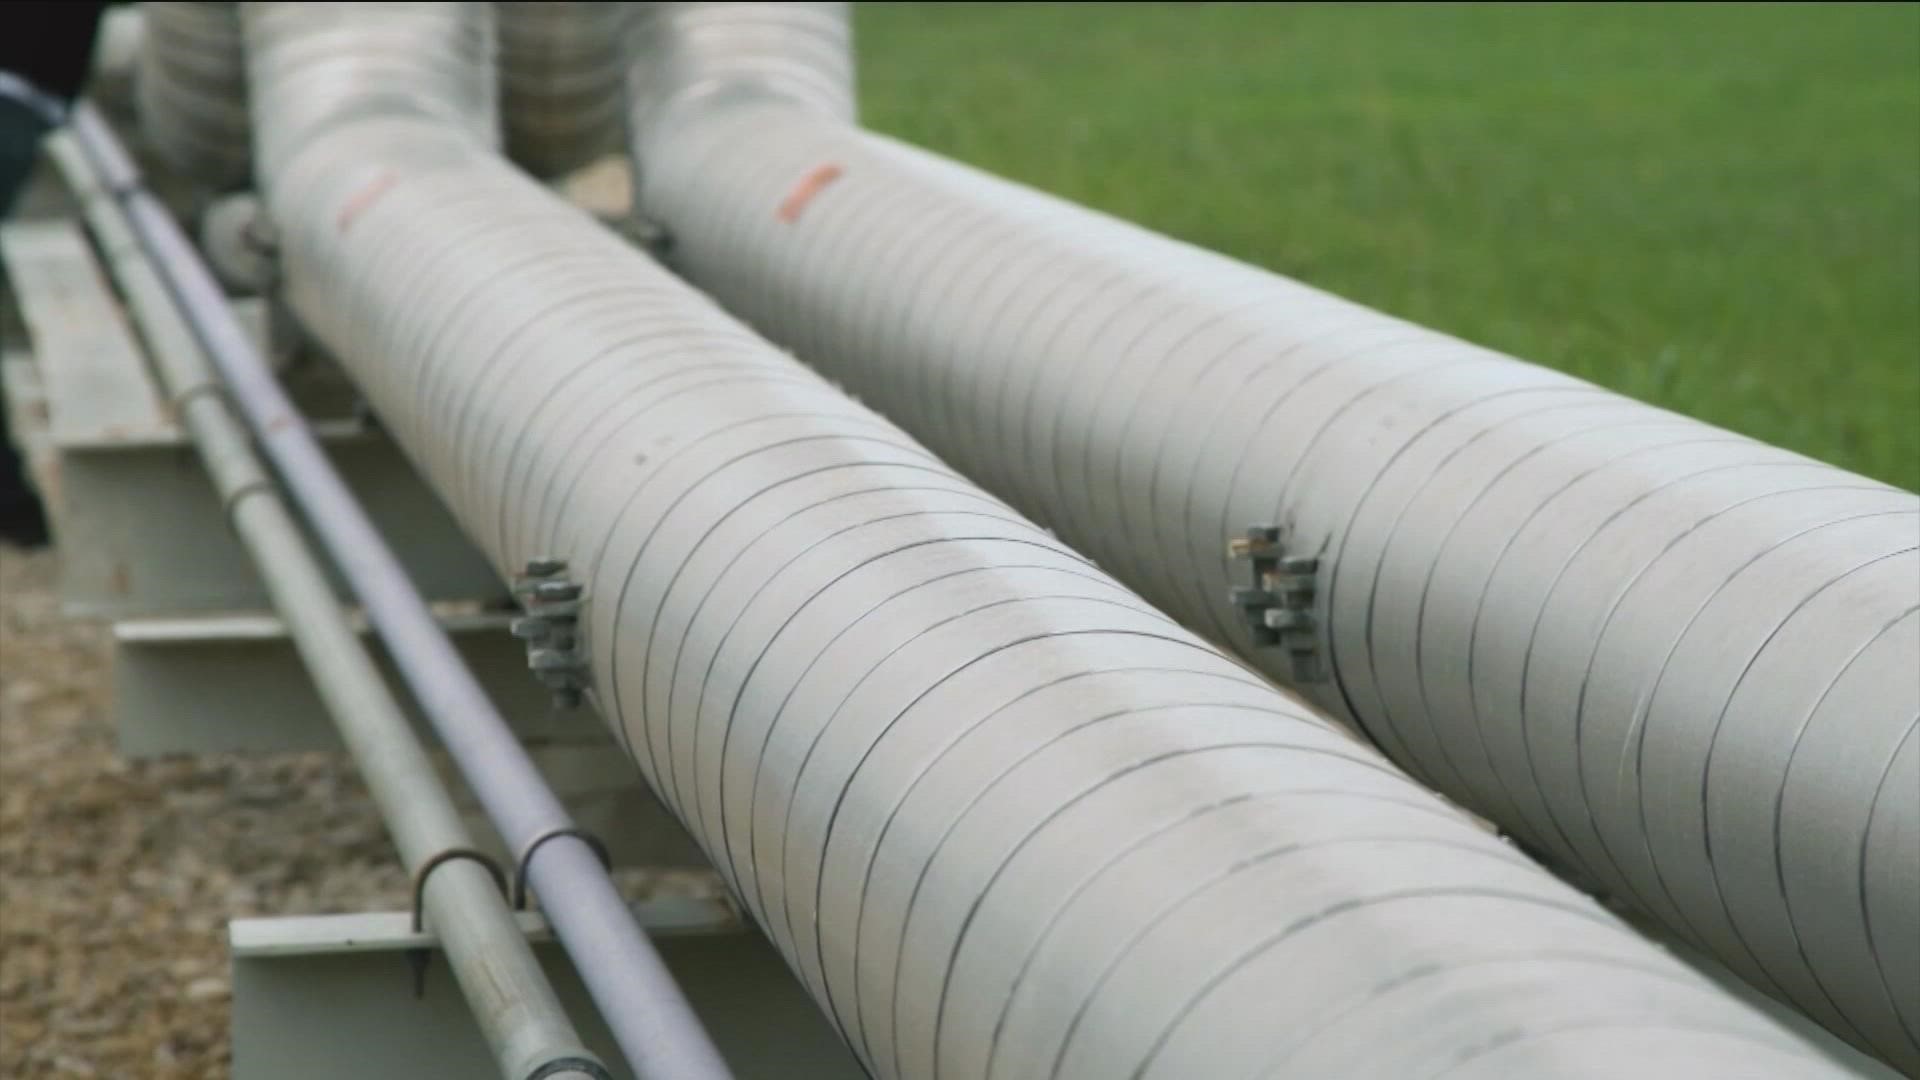 Some natural gas facilities and pipelines must have winter weatherization plans in place.